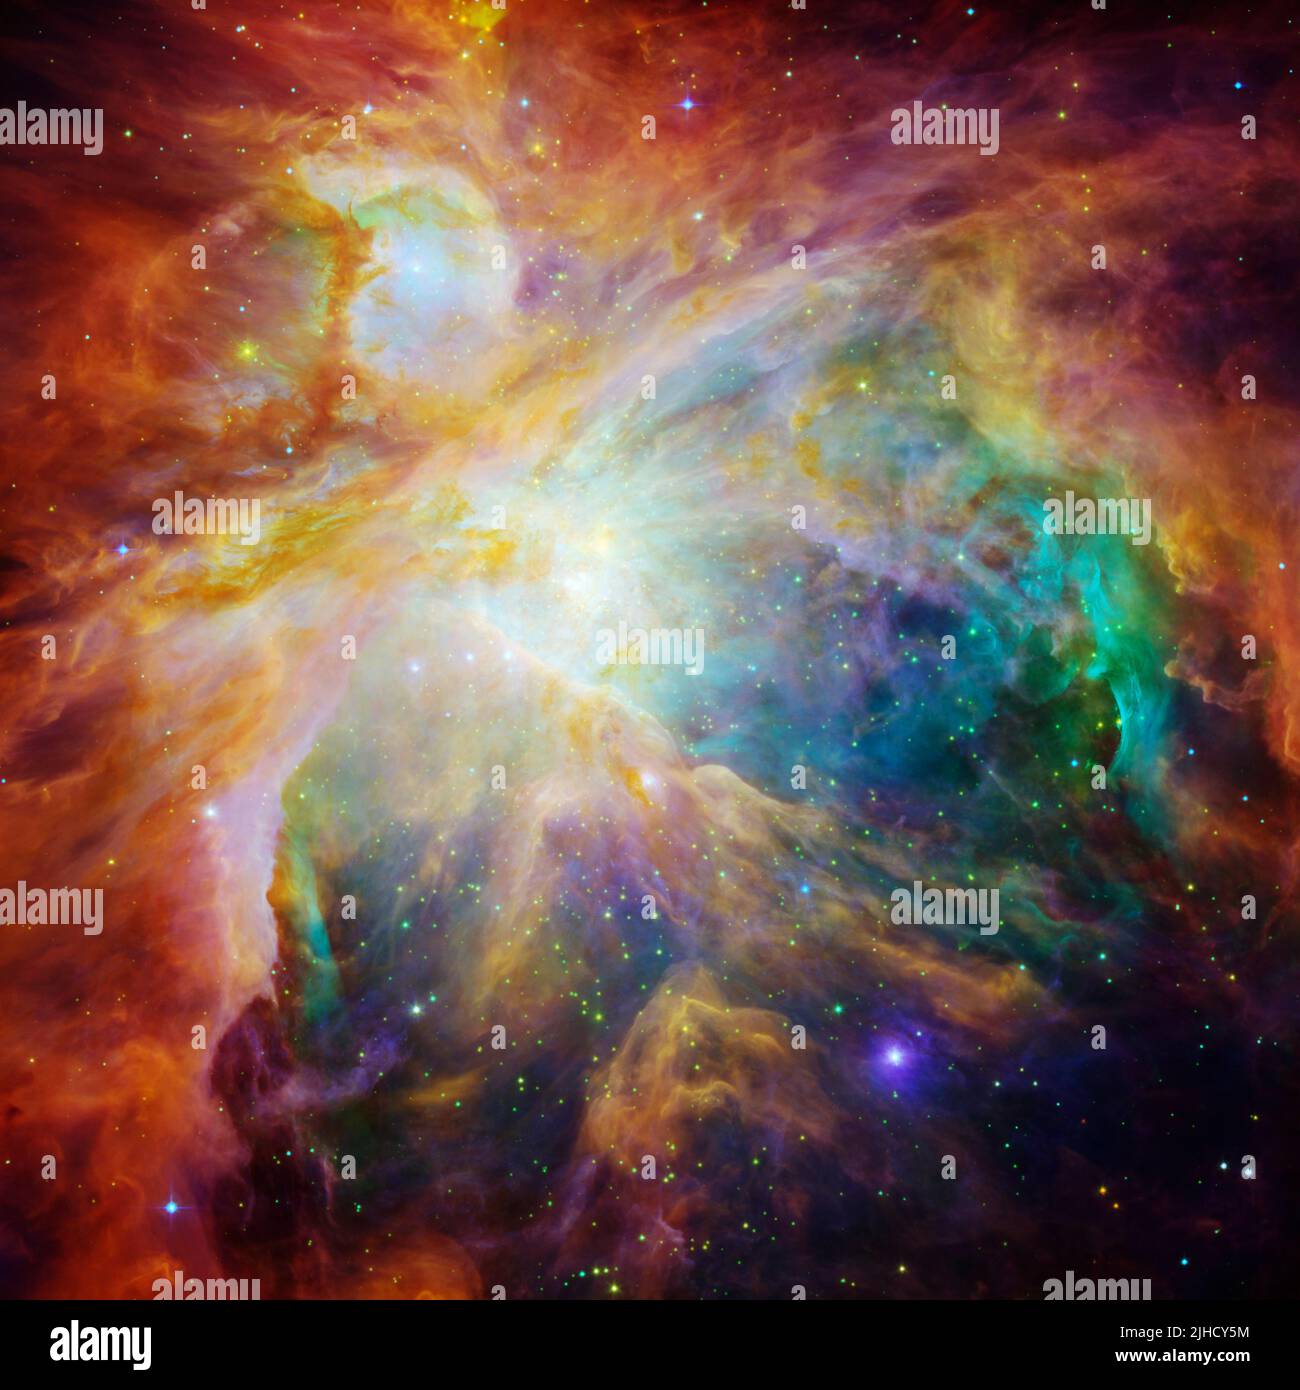 Thanks to NASA for providing us with these wonderful images. These images are created by NASA but you are allowed to use them in your commercial Stock Photo